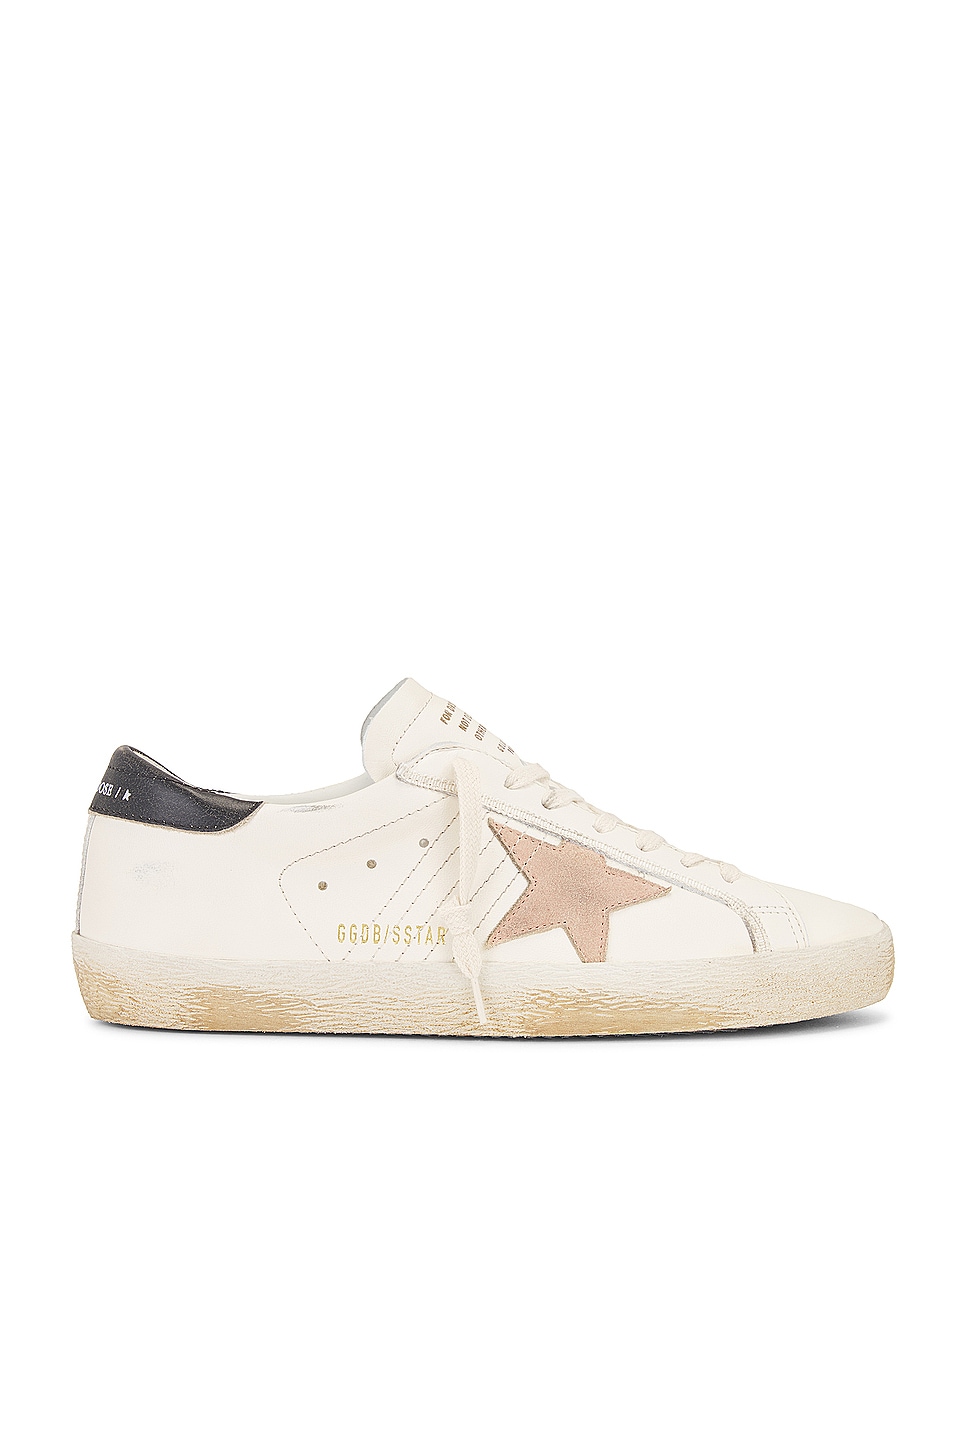 Image 1 of Golden Goose Super Star Nappa Suede Star in White, Pink, & Black